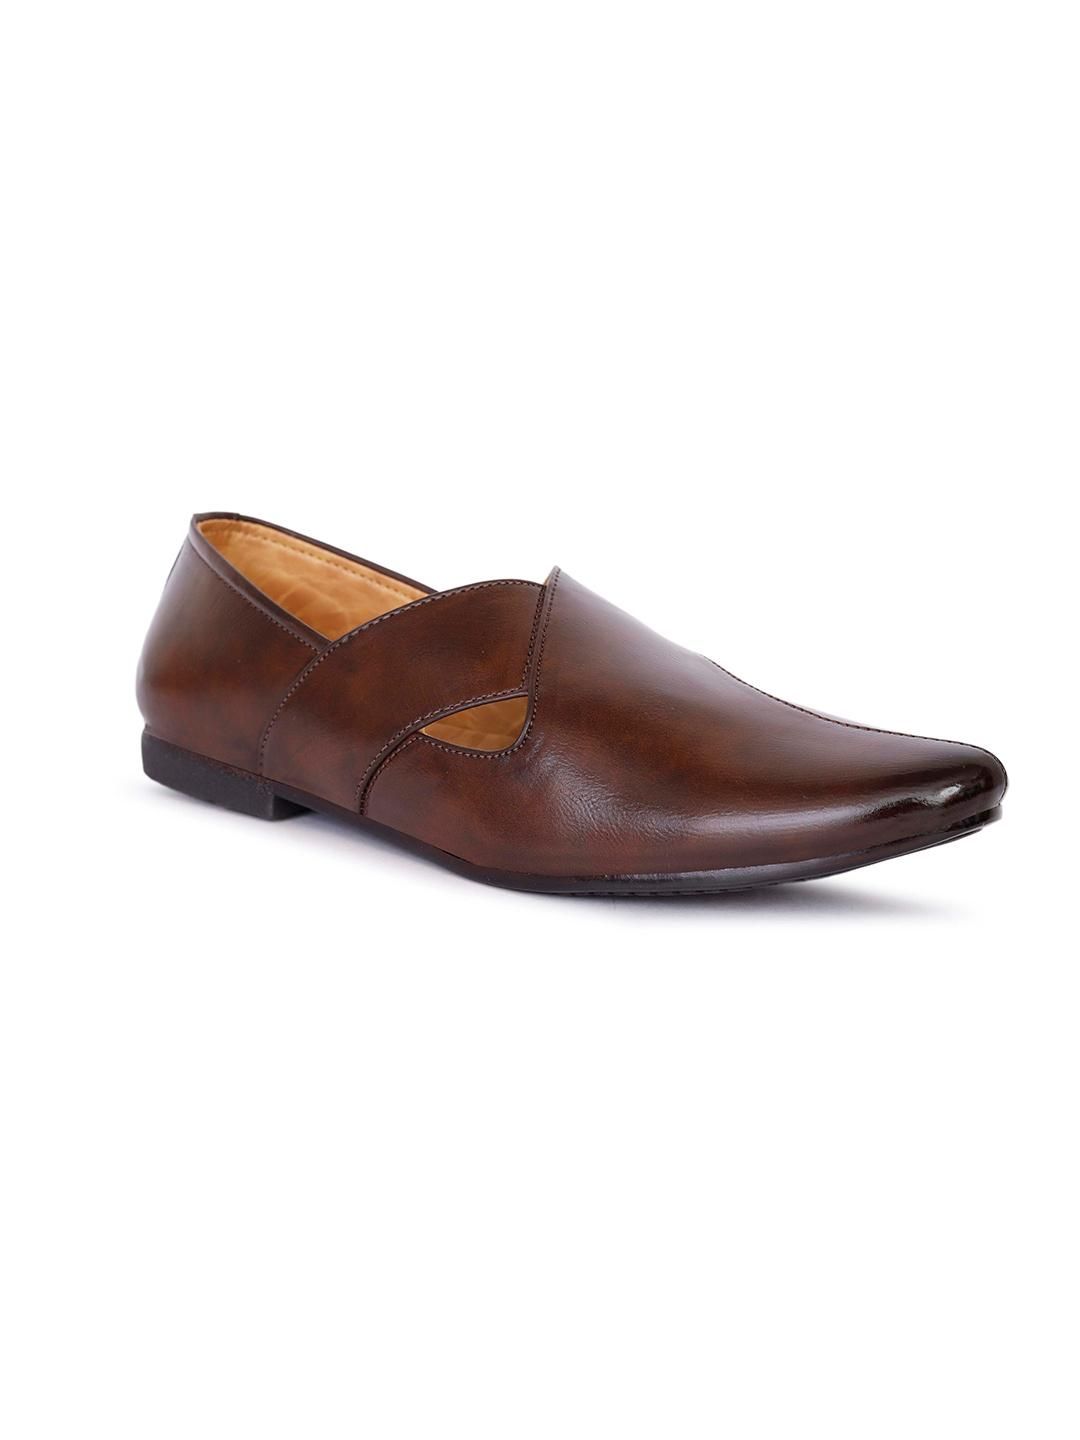 Rvy Men Slip-on Synthetic Leather Loafer